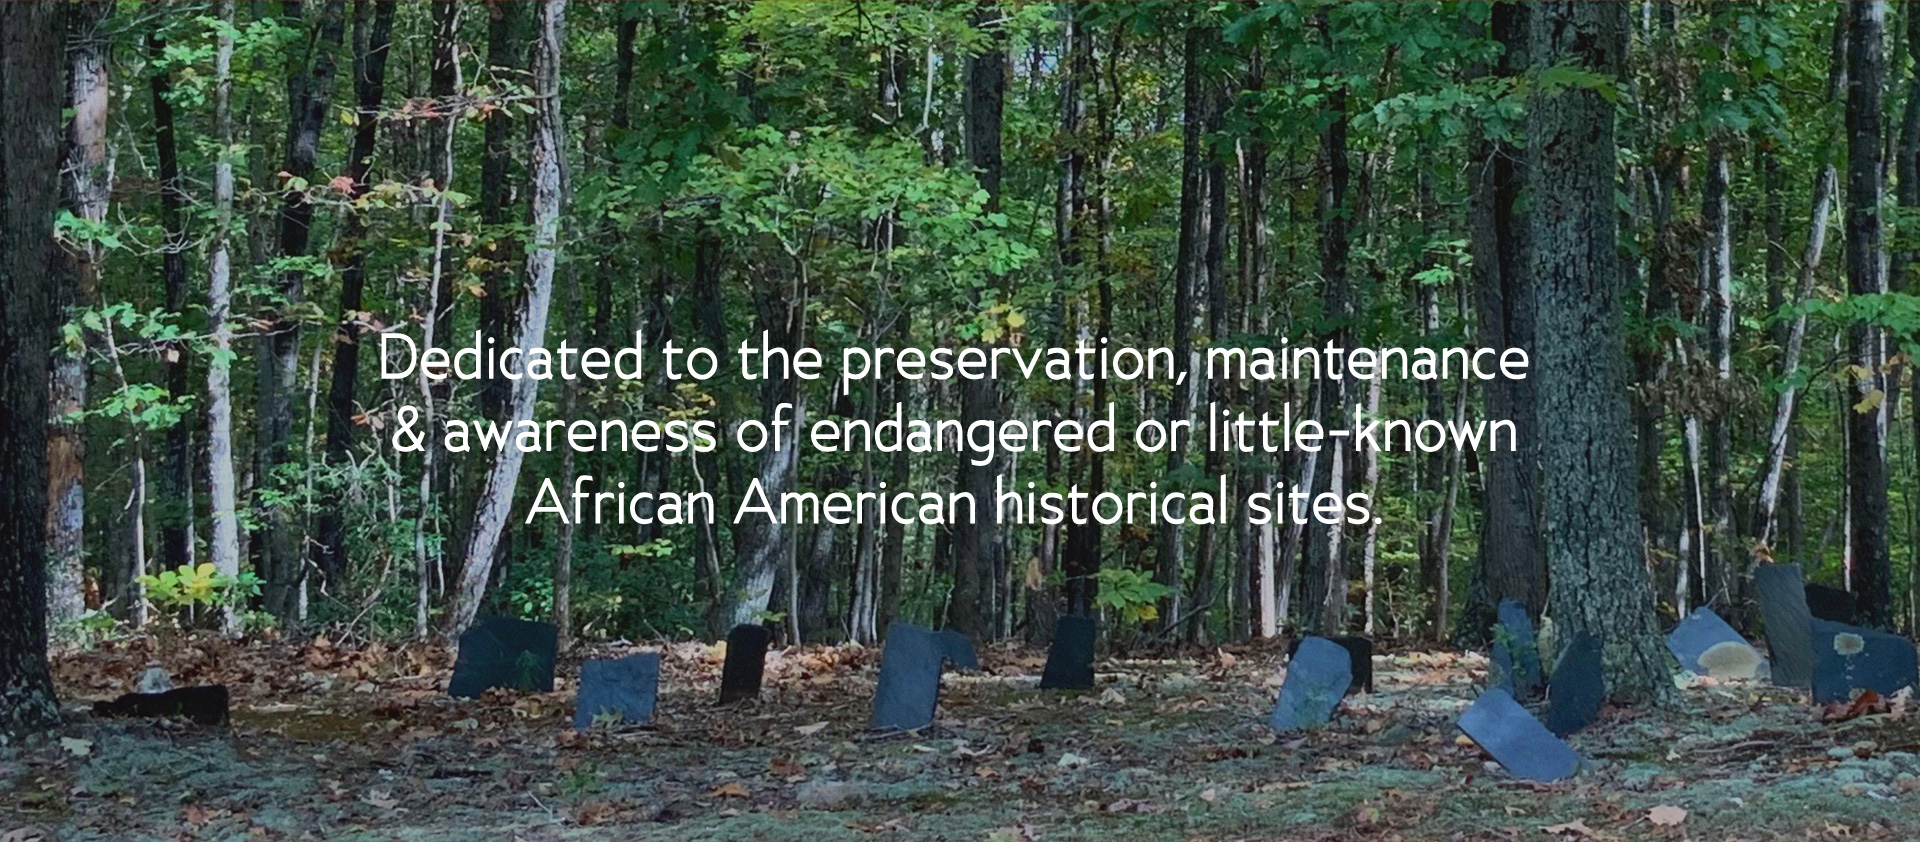 Dedicated to the preservation, maintenance & awareness of endangered or little-known African American historical sites.